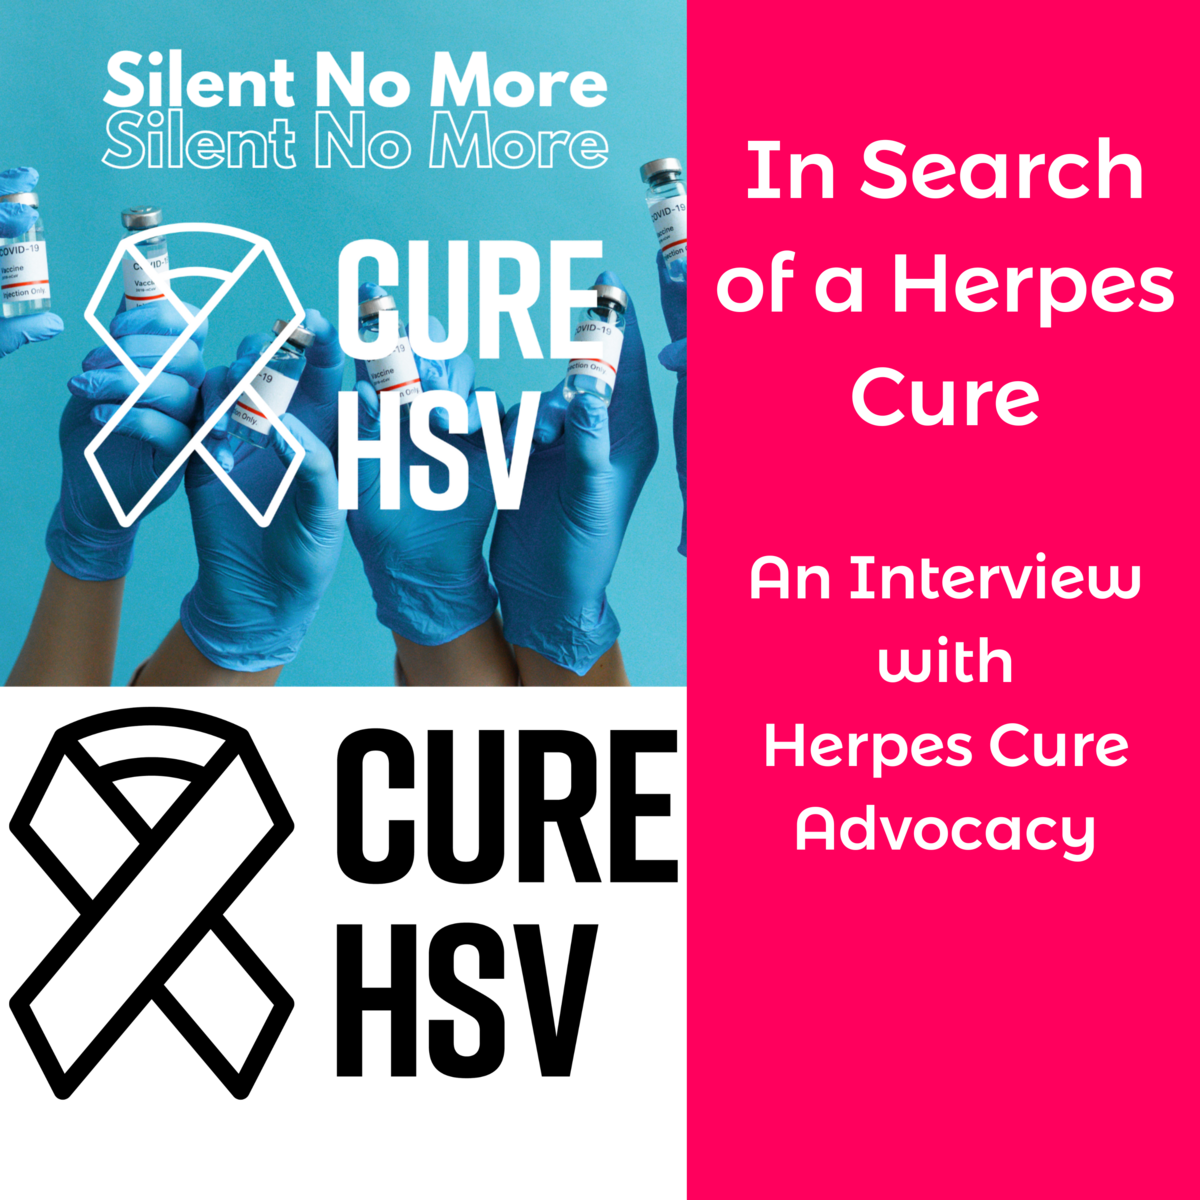 Herpes cure advocacy Podcast cover Libsyn (Podcast Cover)